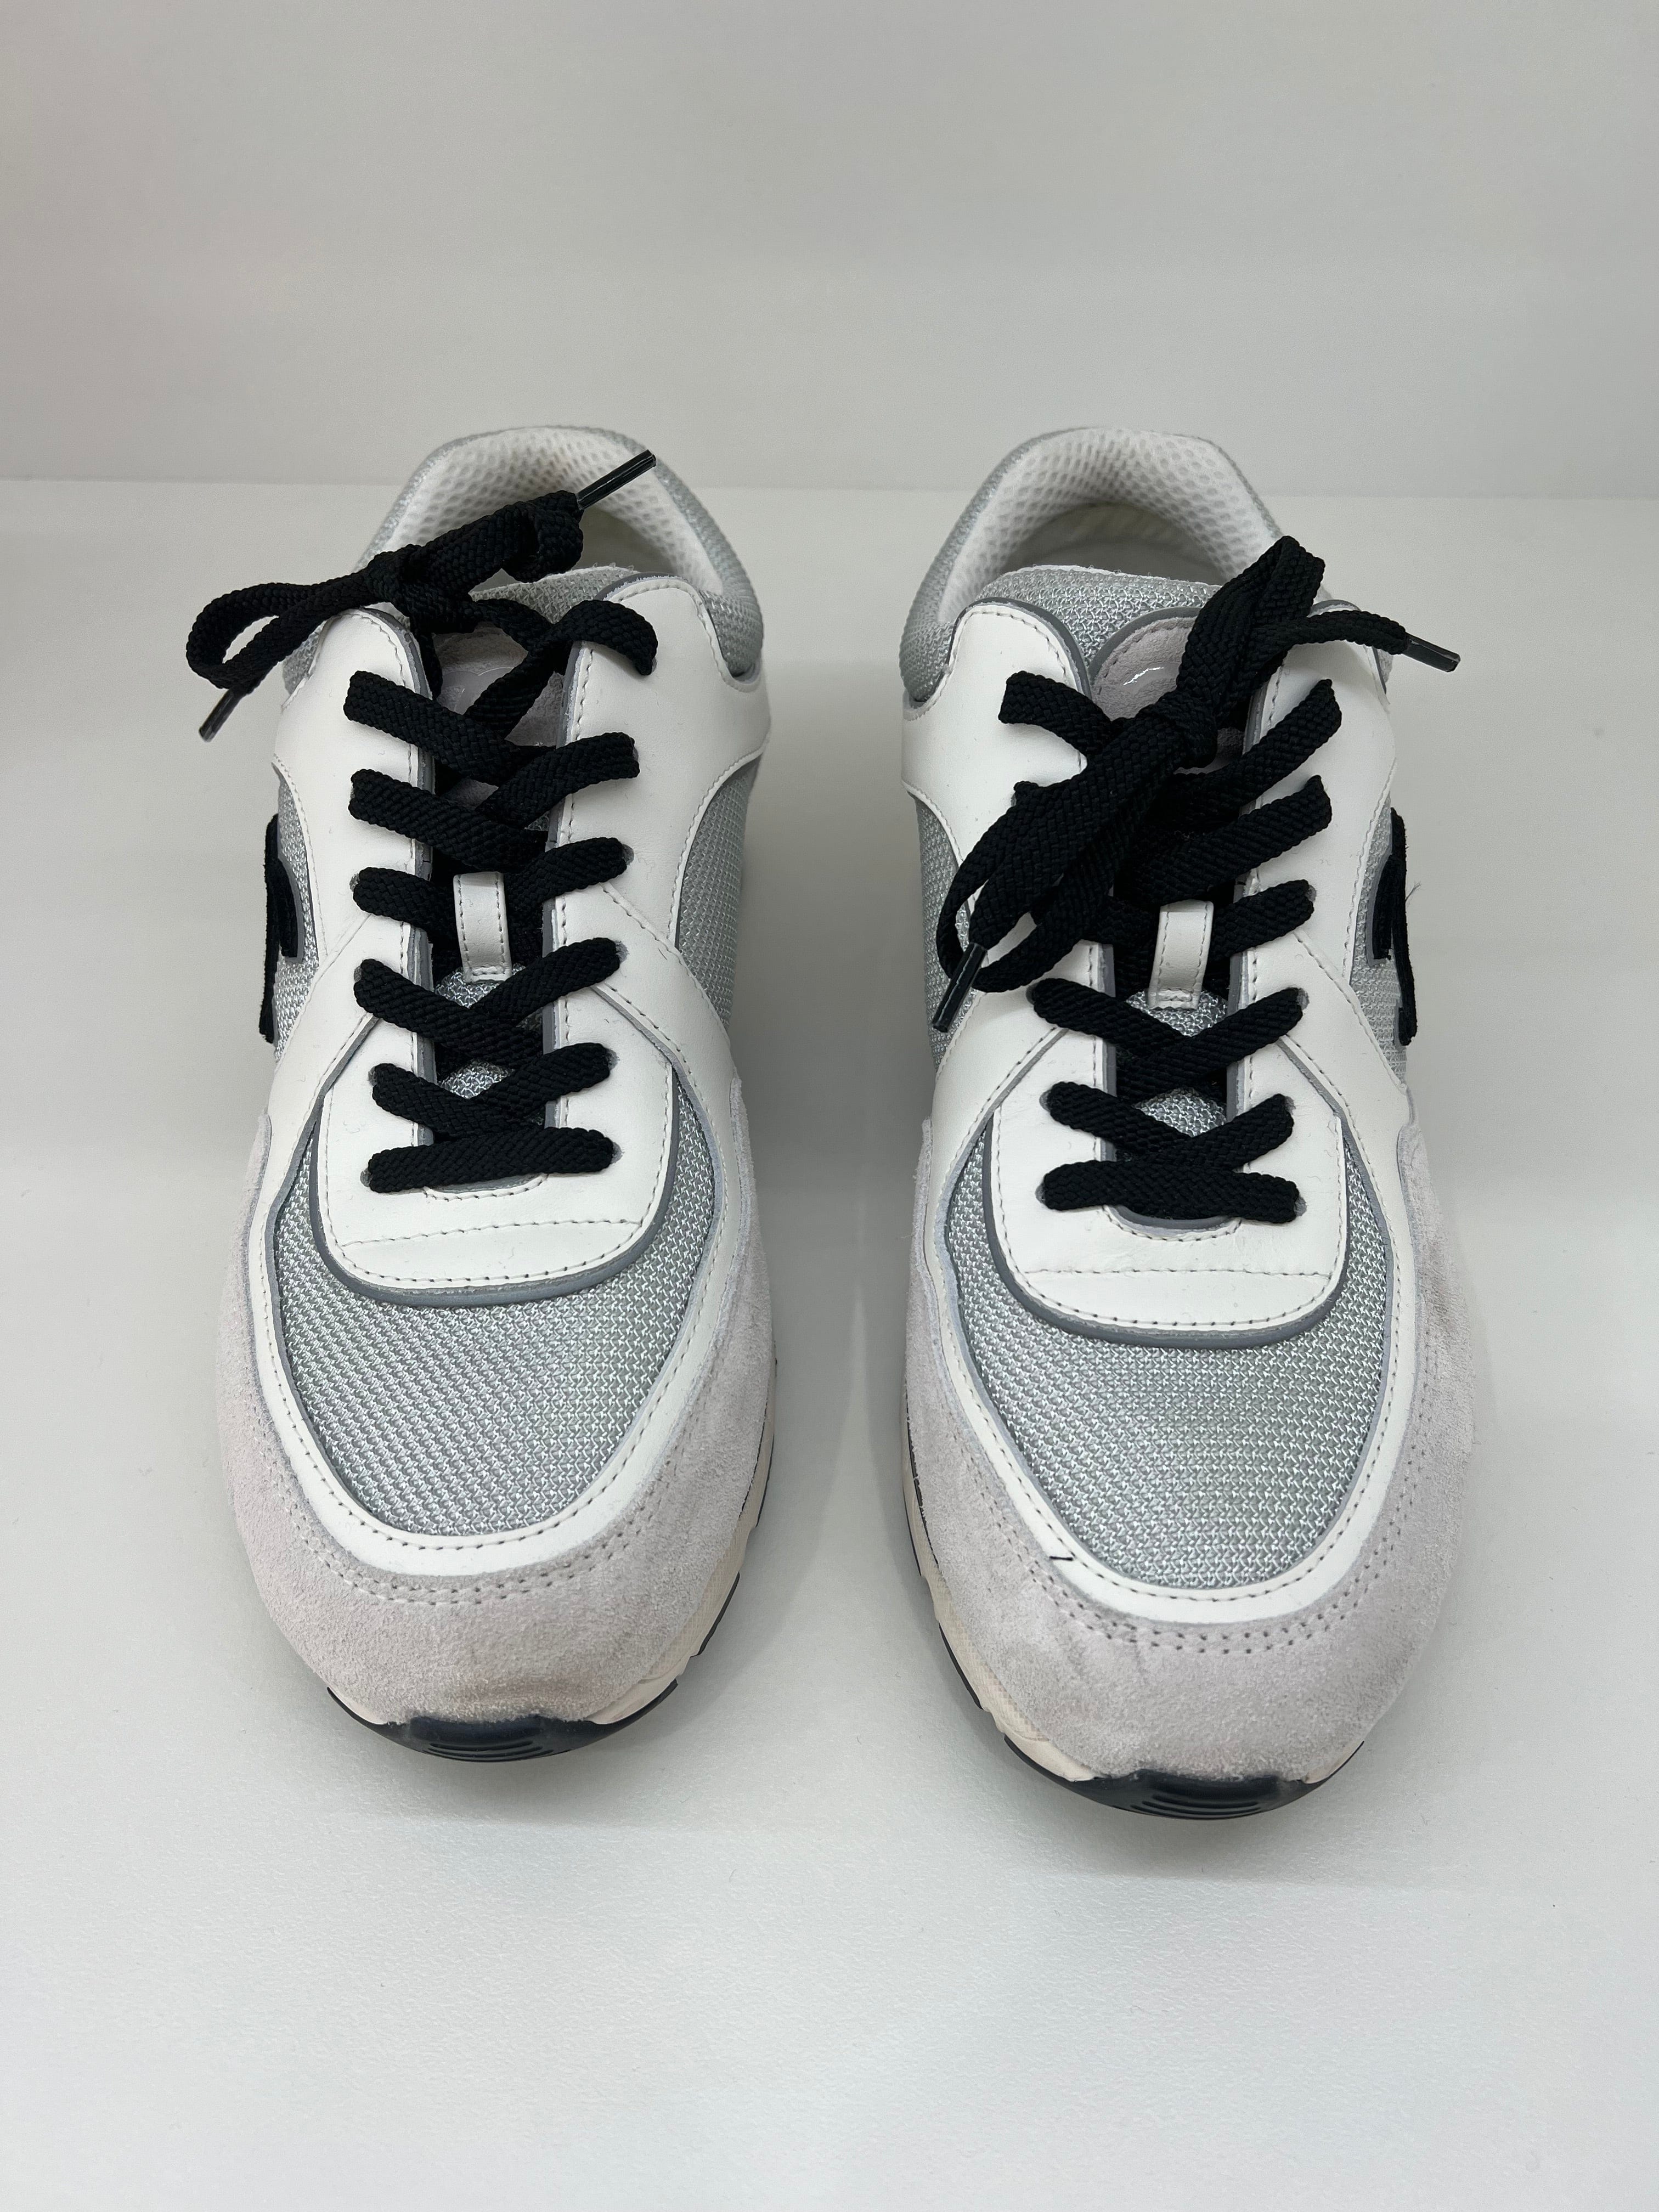 PH Luxury Consignment Chanel Sneakers - Size 40